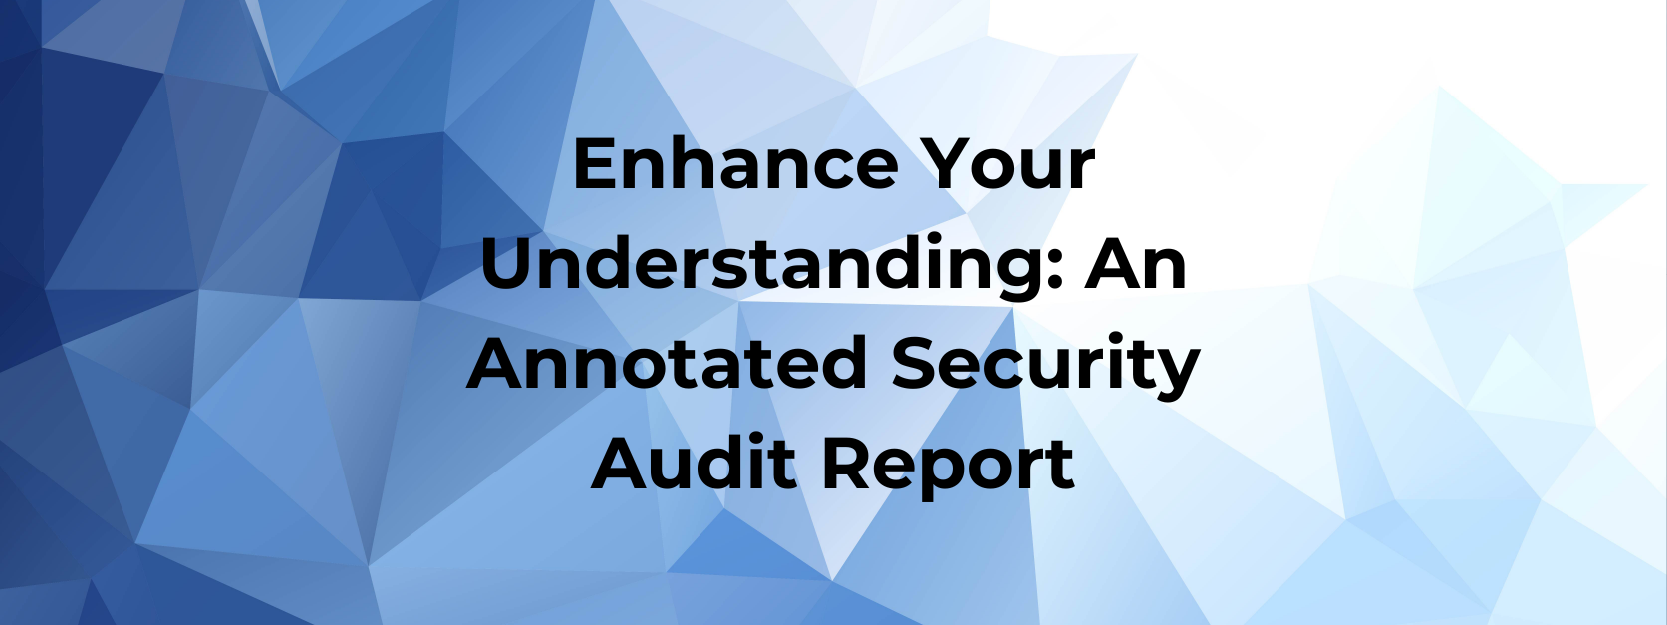 The blog title Enhance Your Understanding: An annotated Security Audit Report on a blue and white background banner.